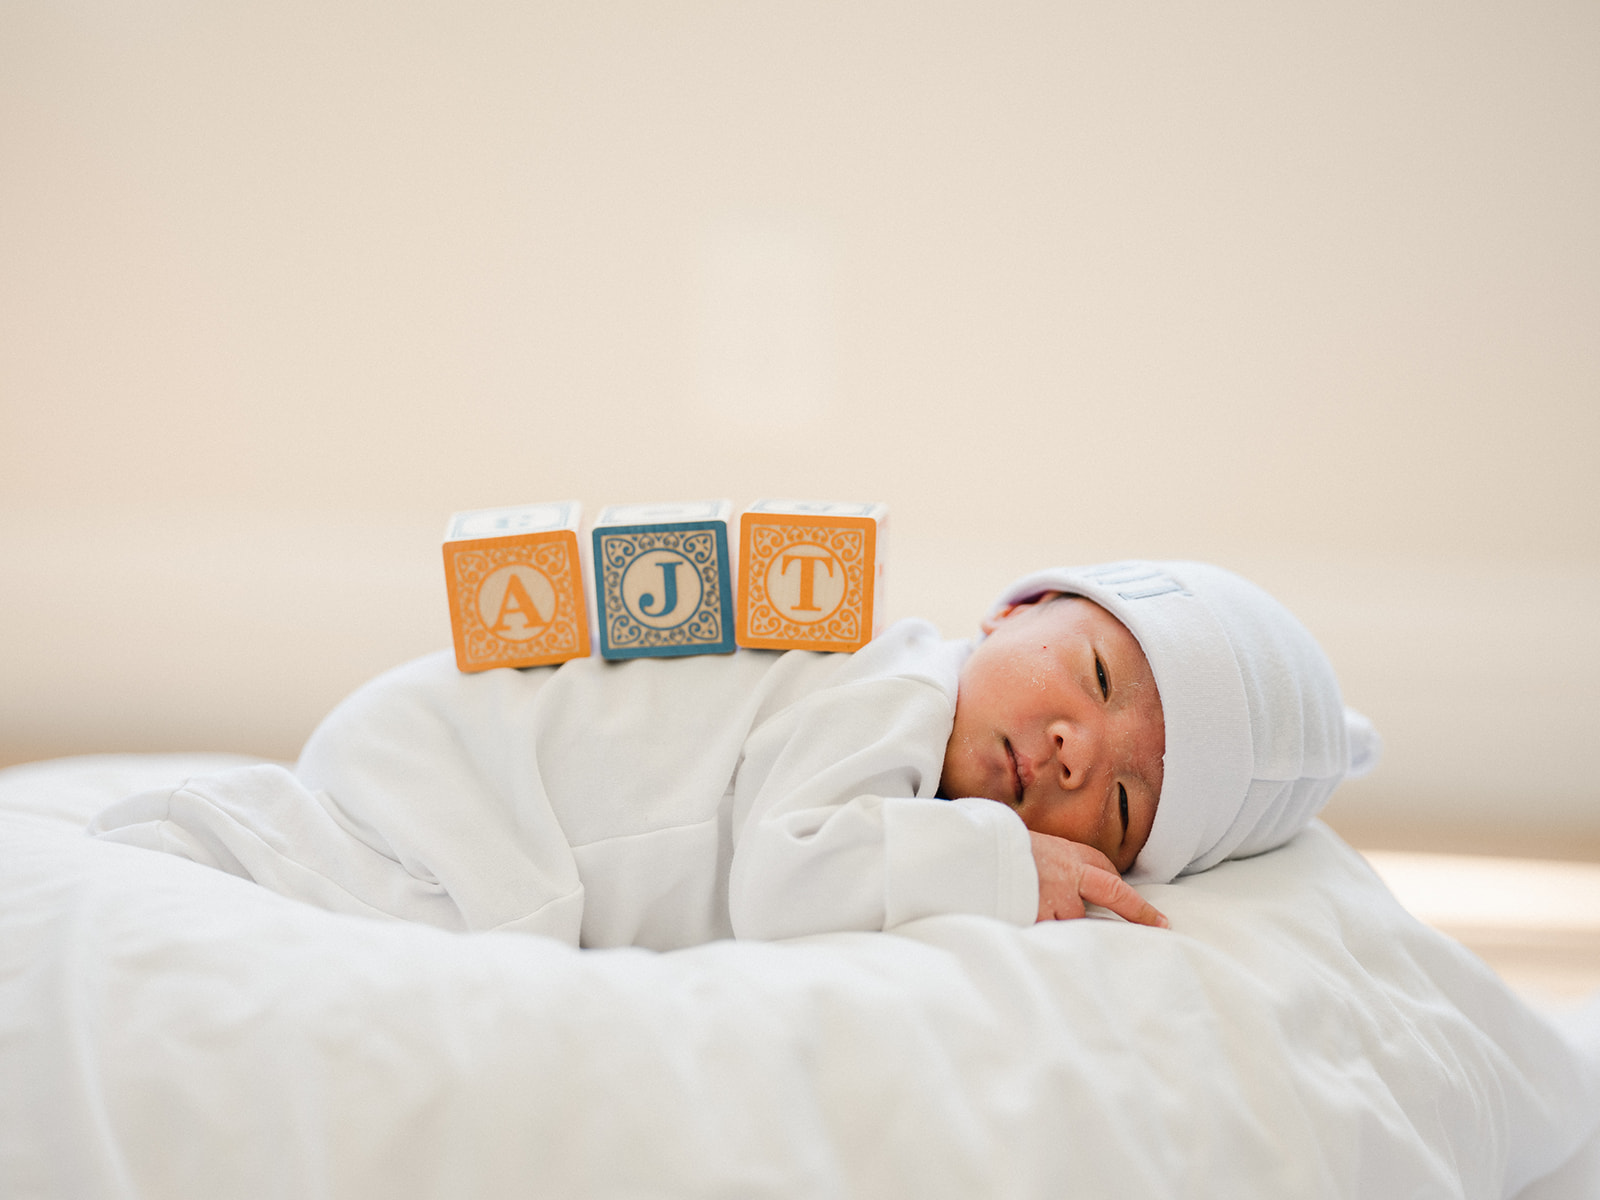 Bundled in their cute white outfits, the boys were sleepy and peaceful throughout the photoshoot. #newborn #photography